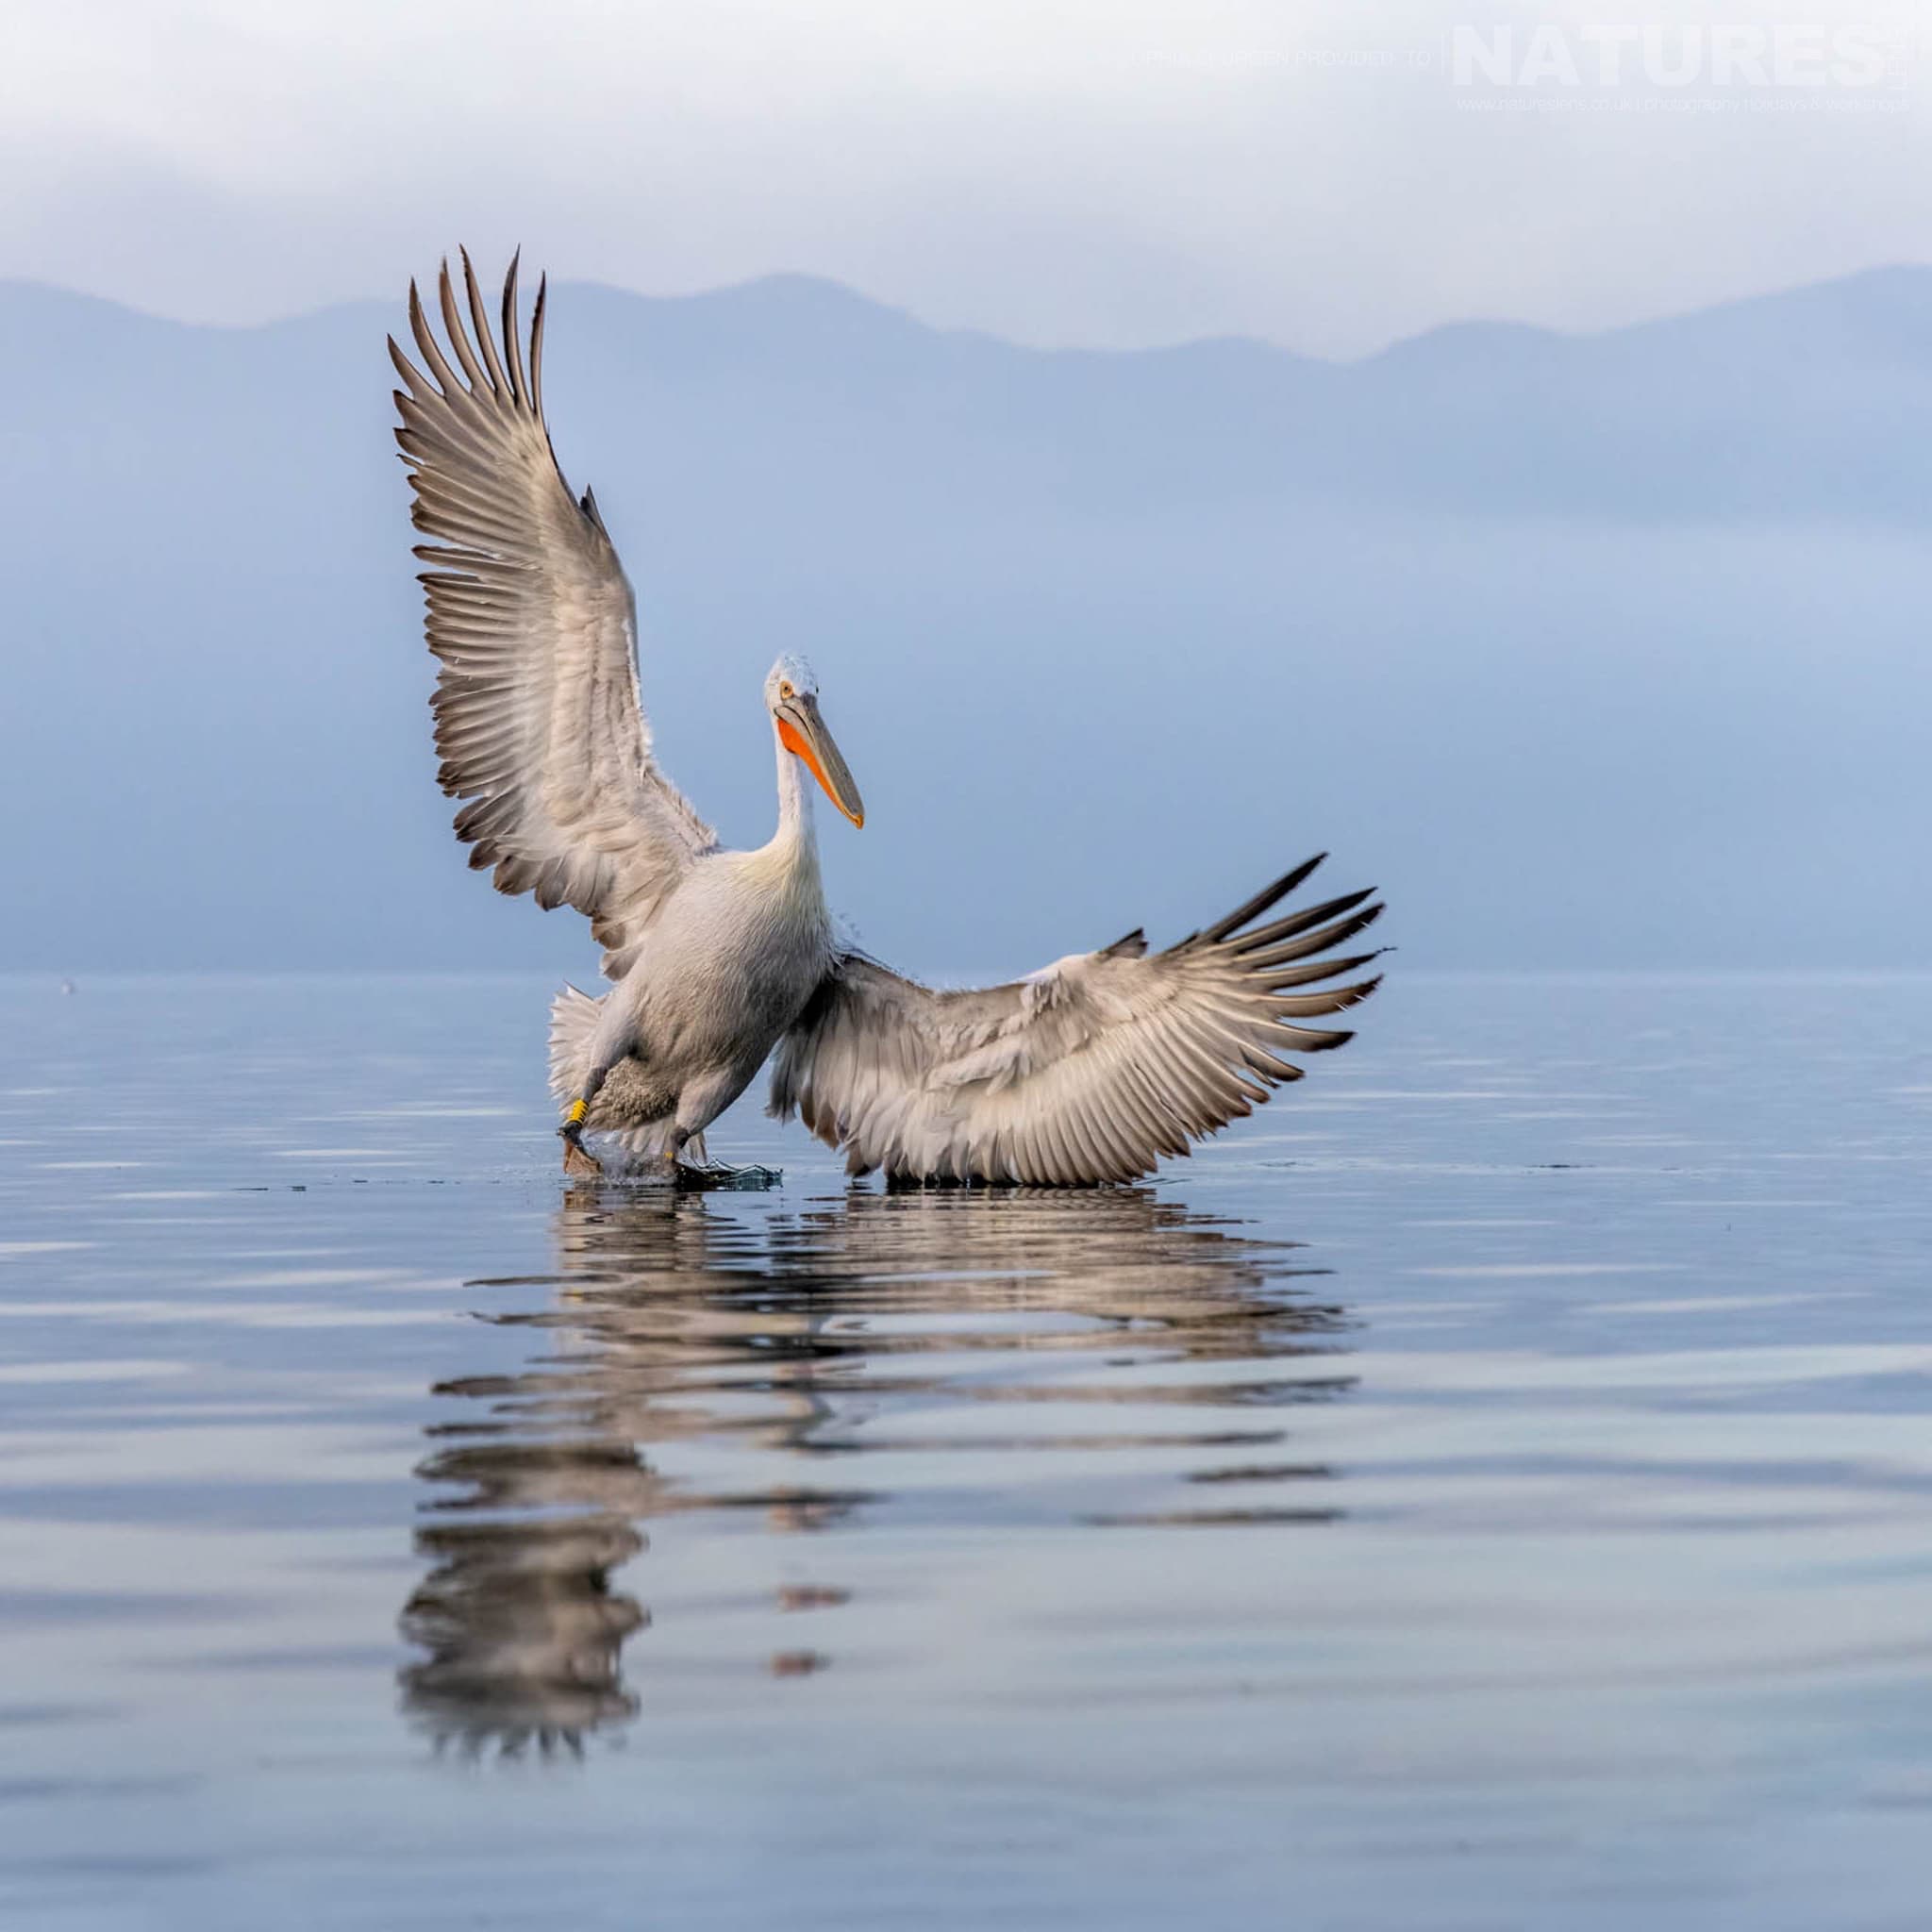 One Of The Dalmatian Pelicans Of Greece Landing On The Waters Of Lake Kerkini